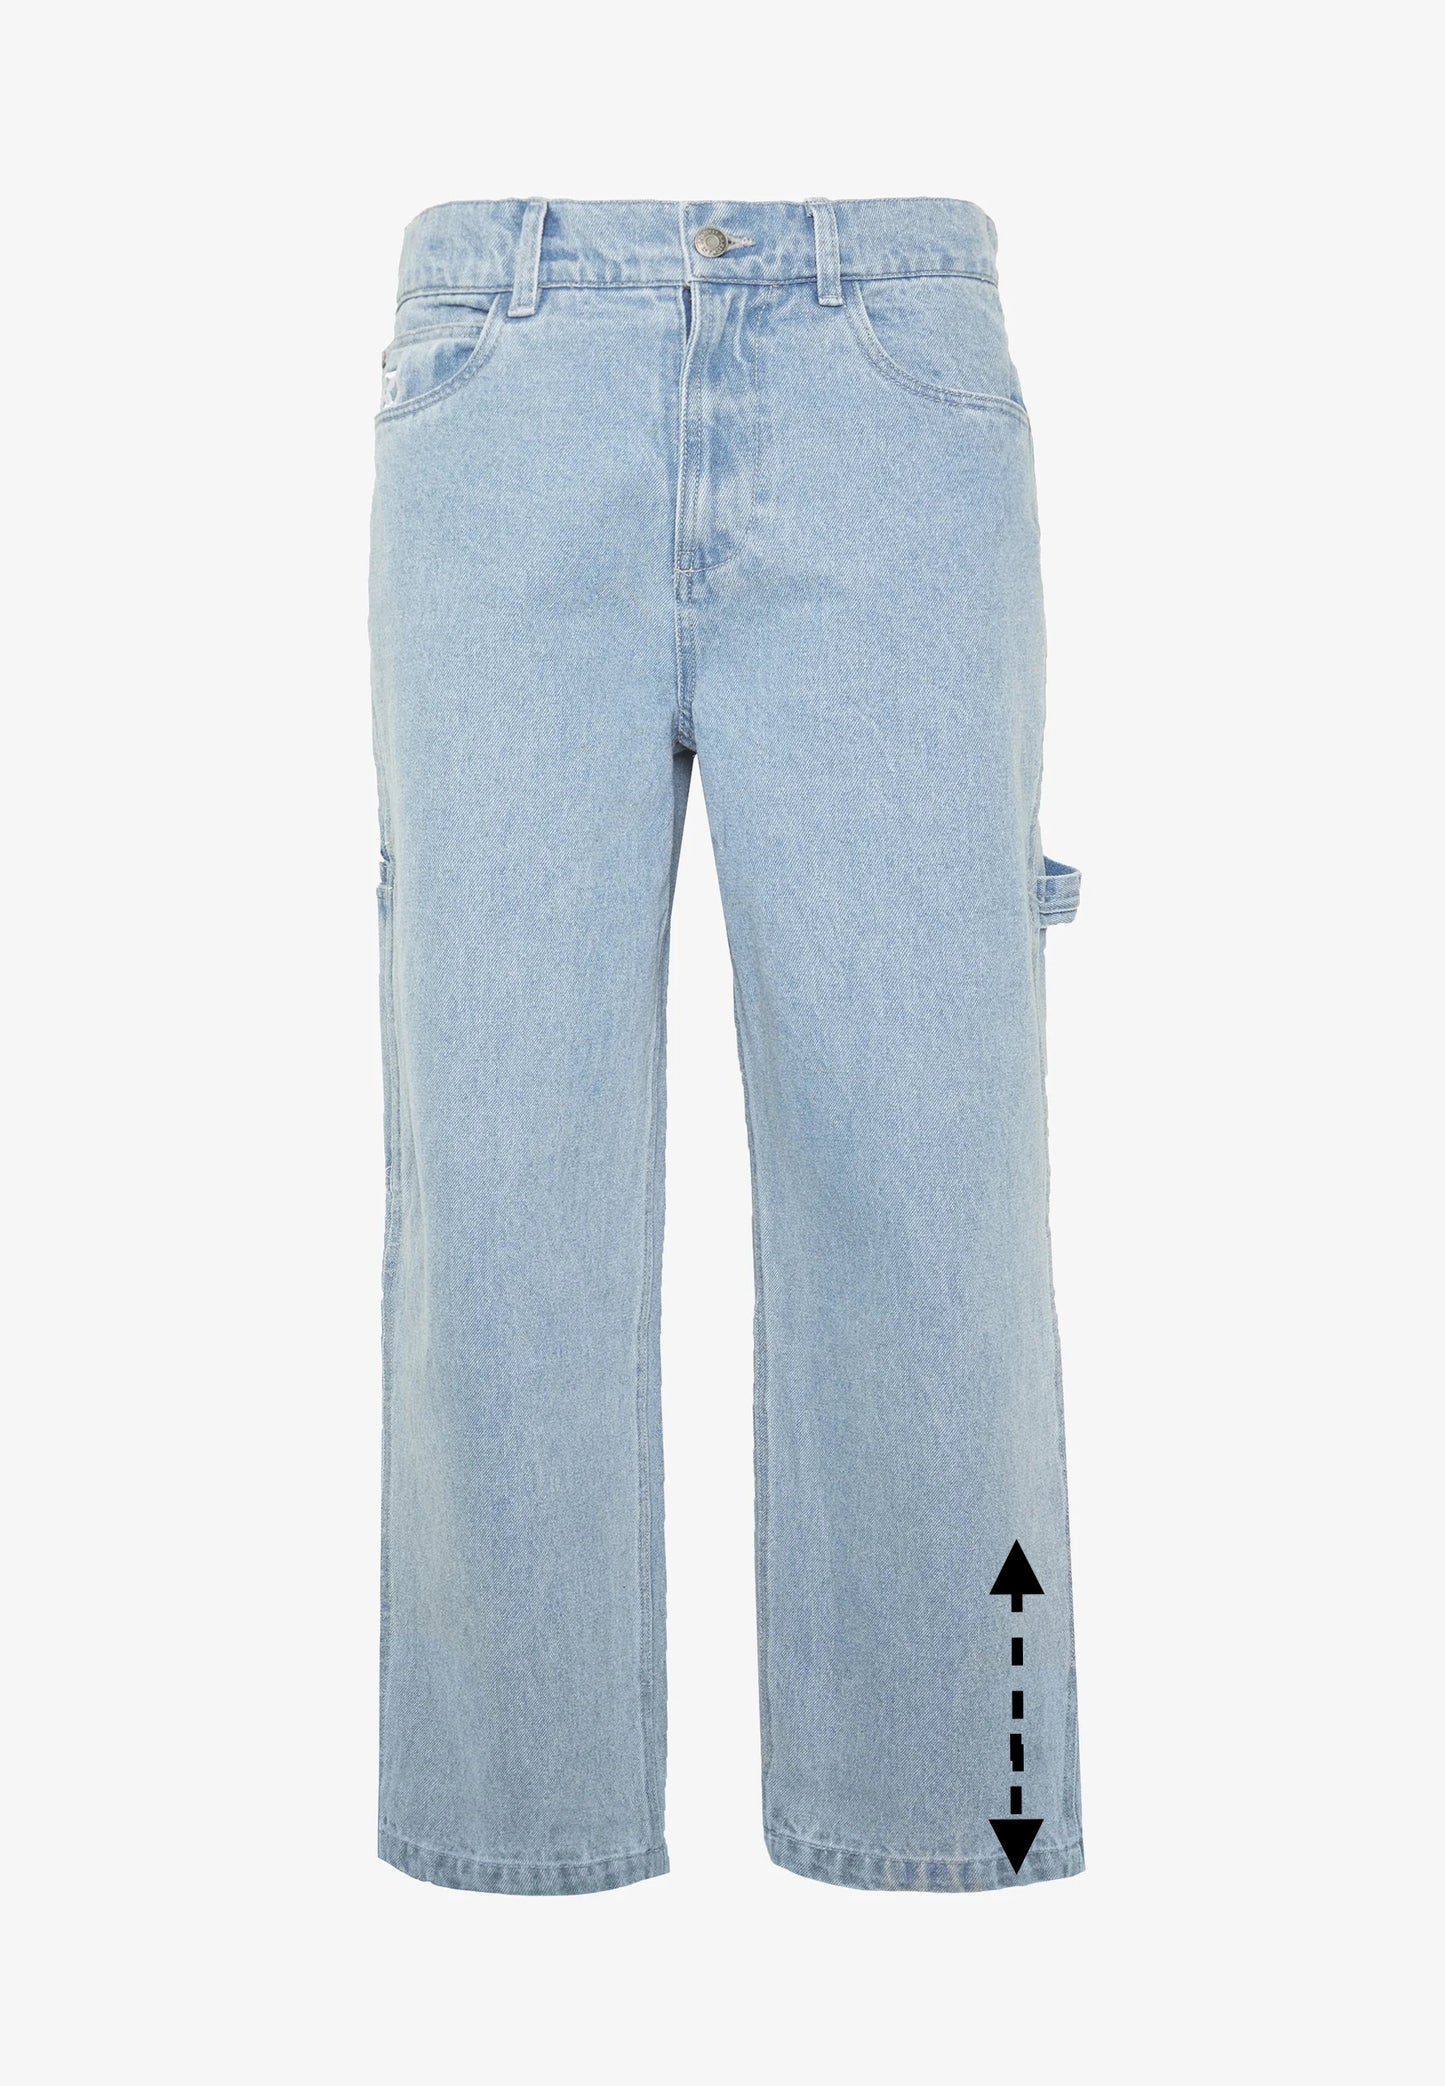 Lay Up/down jeans trousers